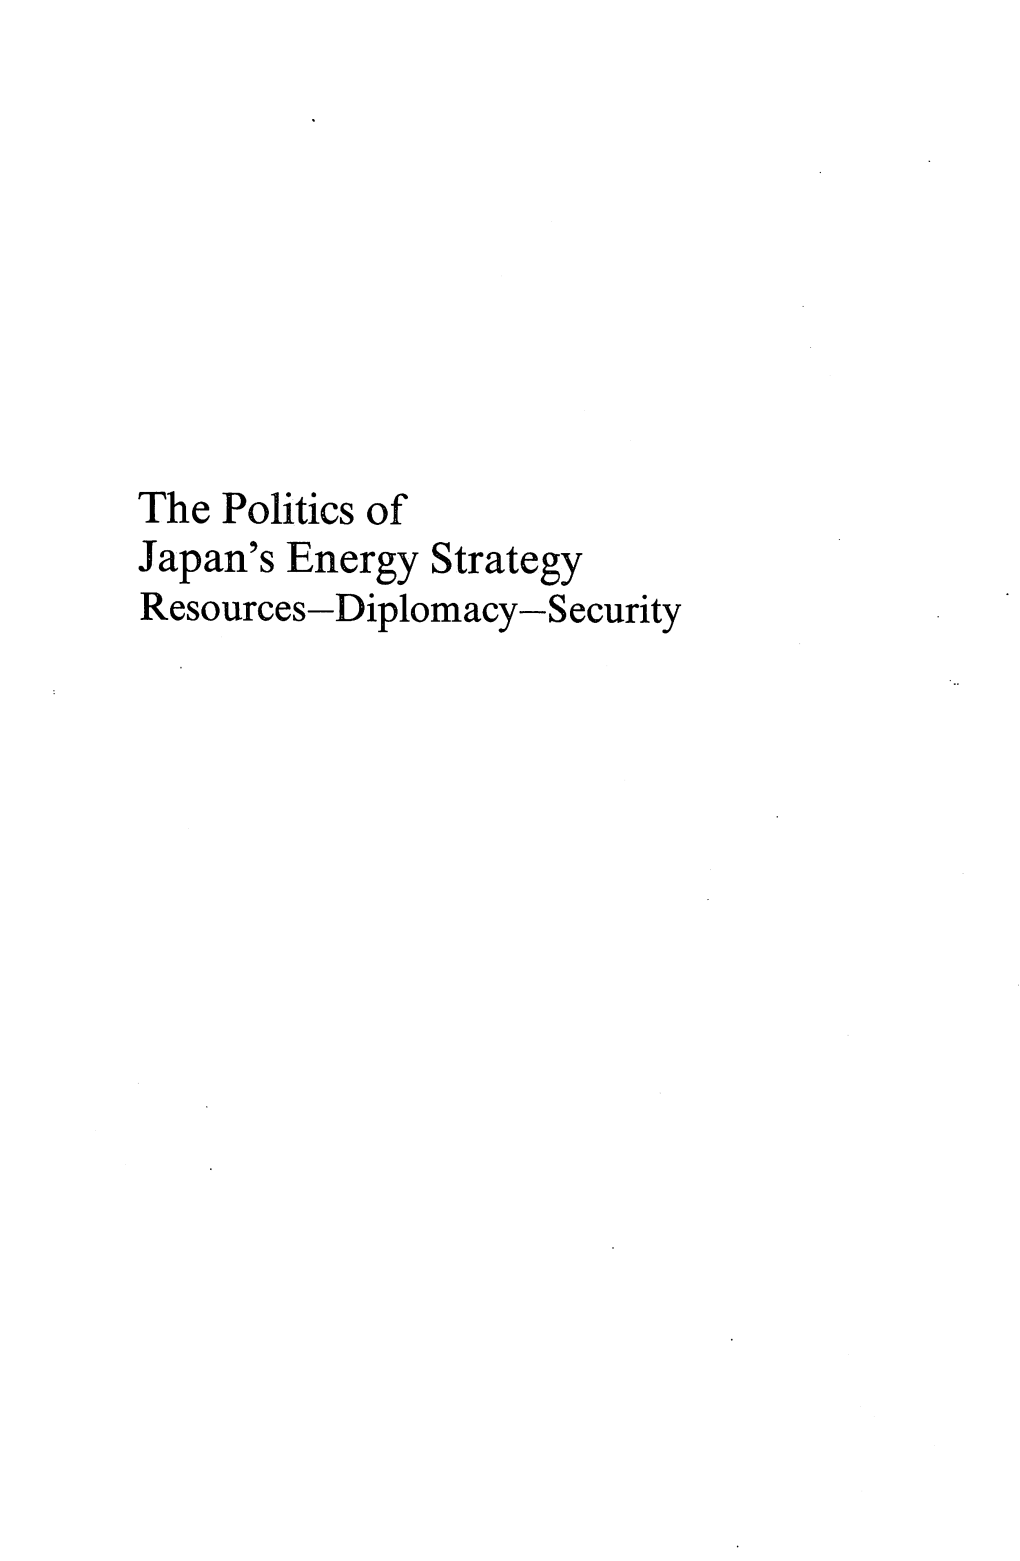 Japan's Energy Strategy Resources—Diplomacy—Security a Publication of the Institute Ofeast Asian Studies, Universityof California, Berkeley